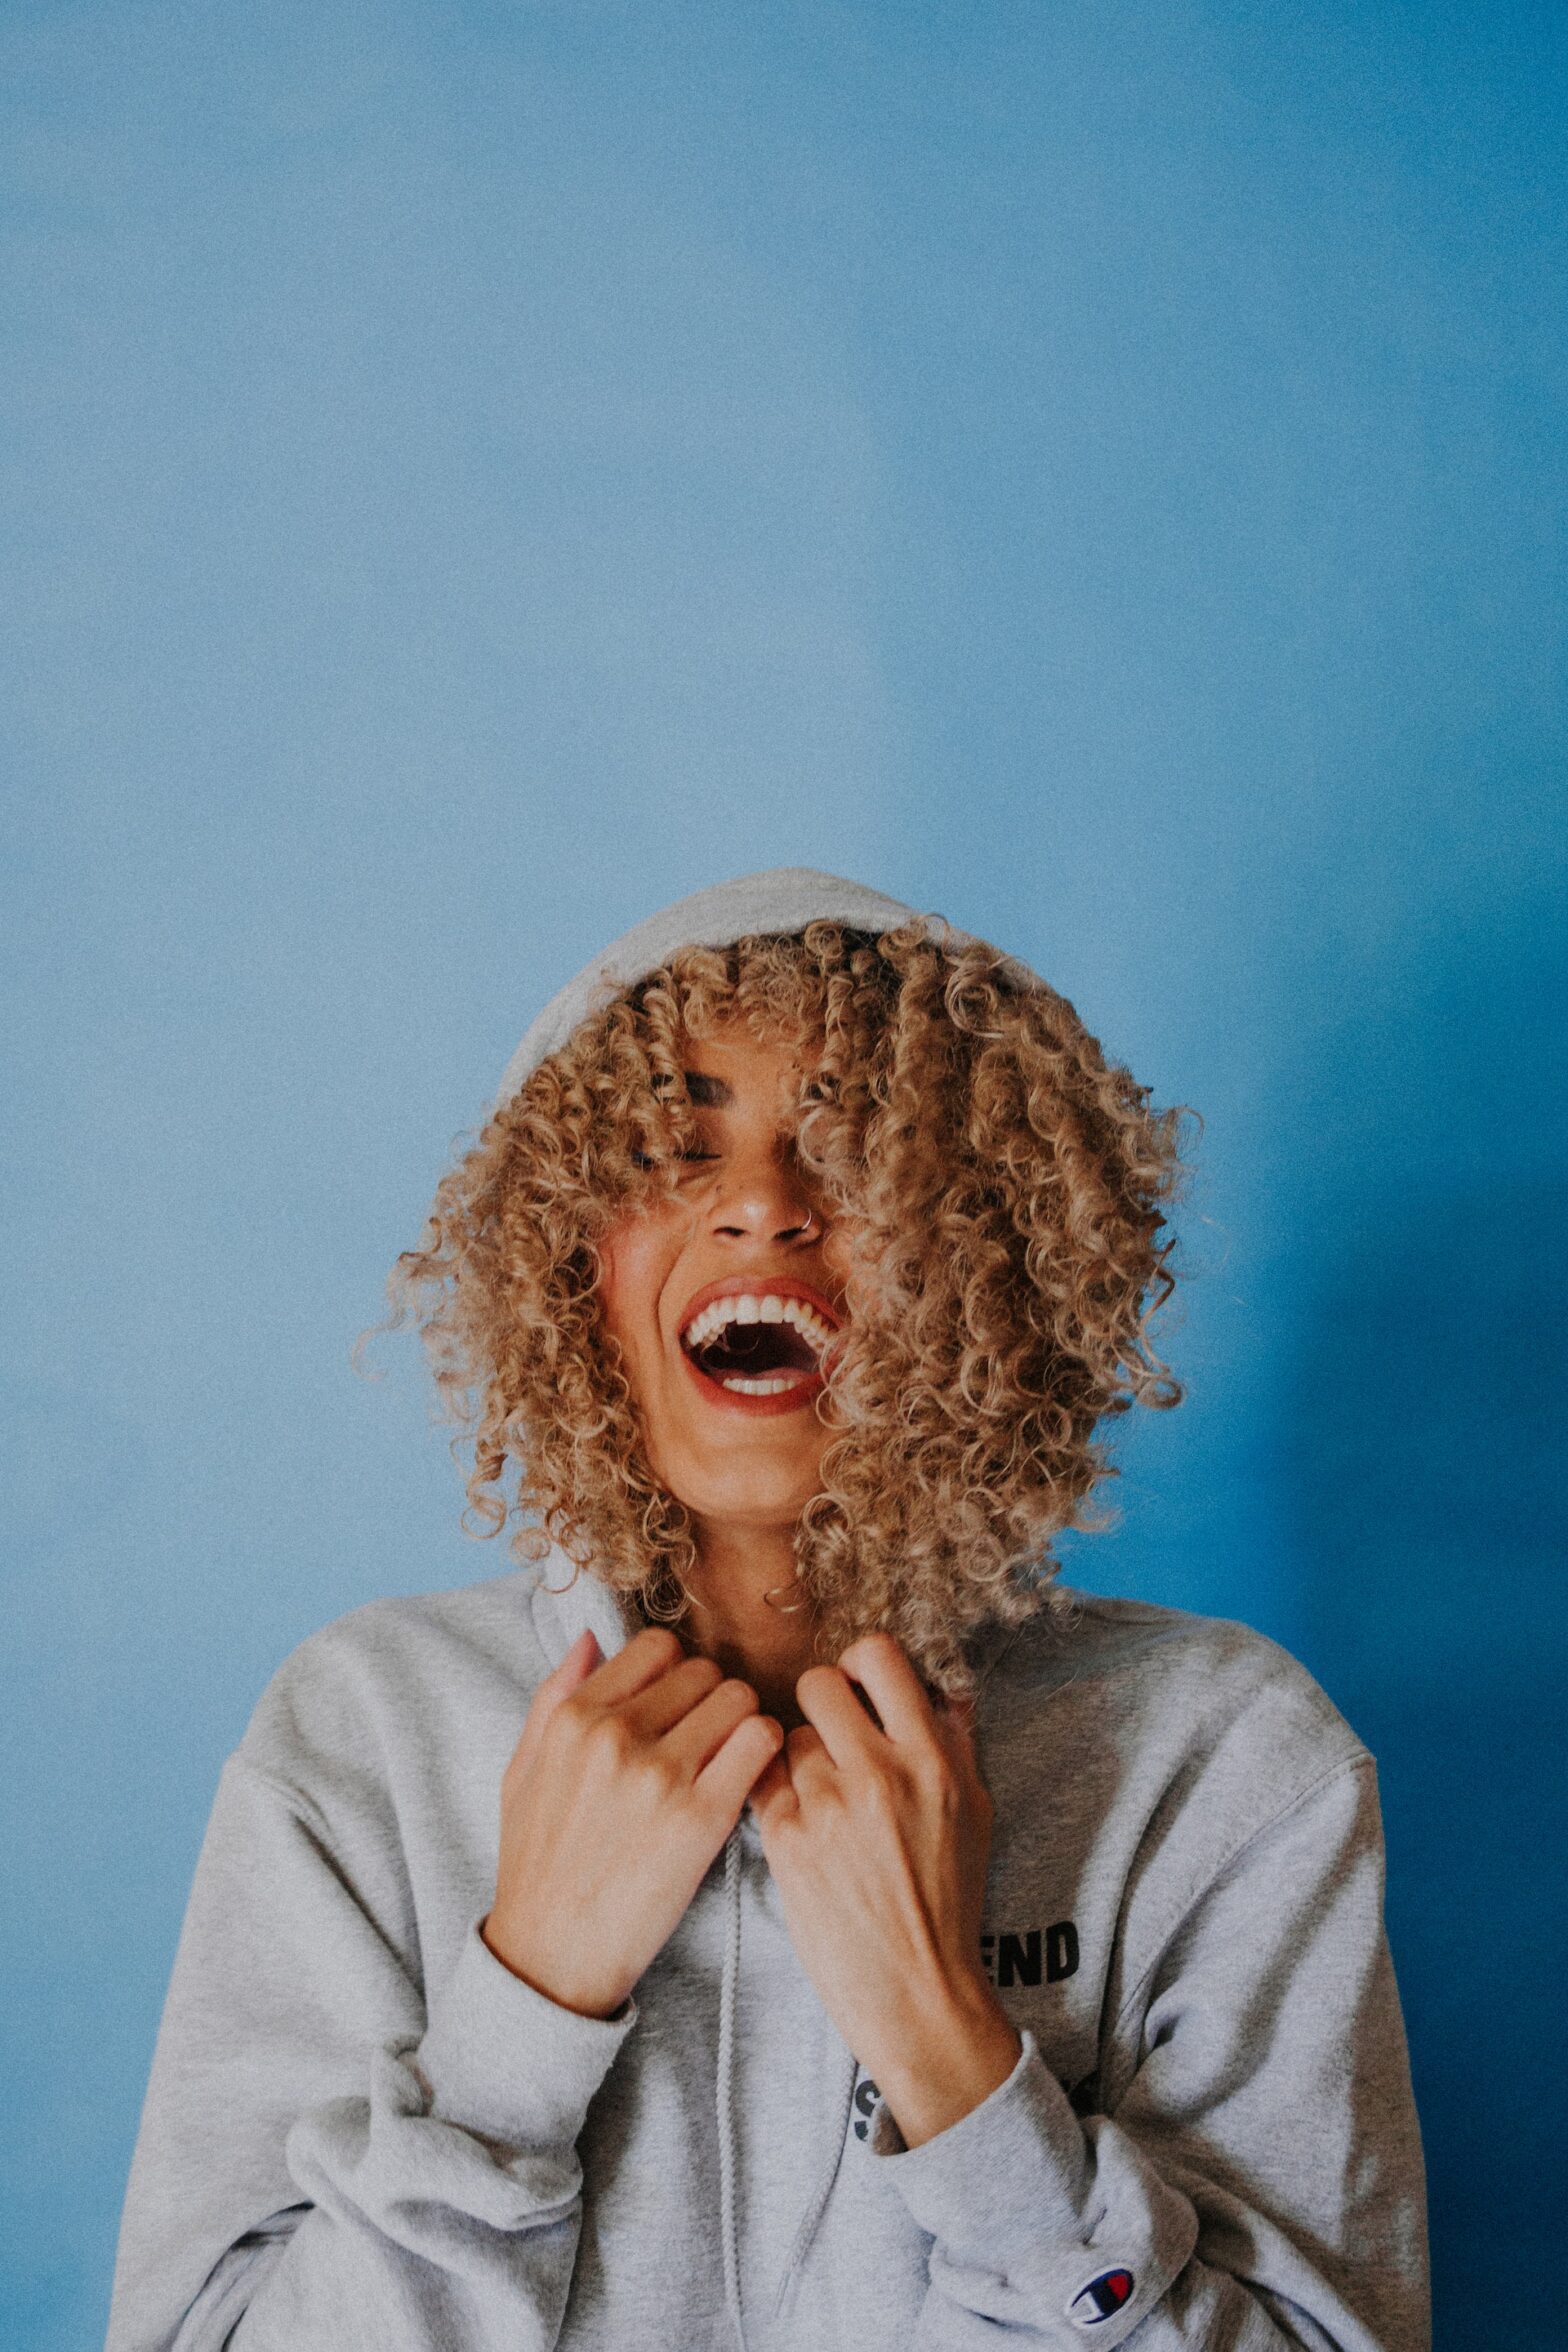 Mixed race woman with curly blond hair laughing in a sweatshirt on a blue background